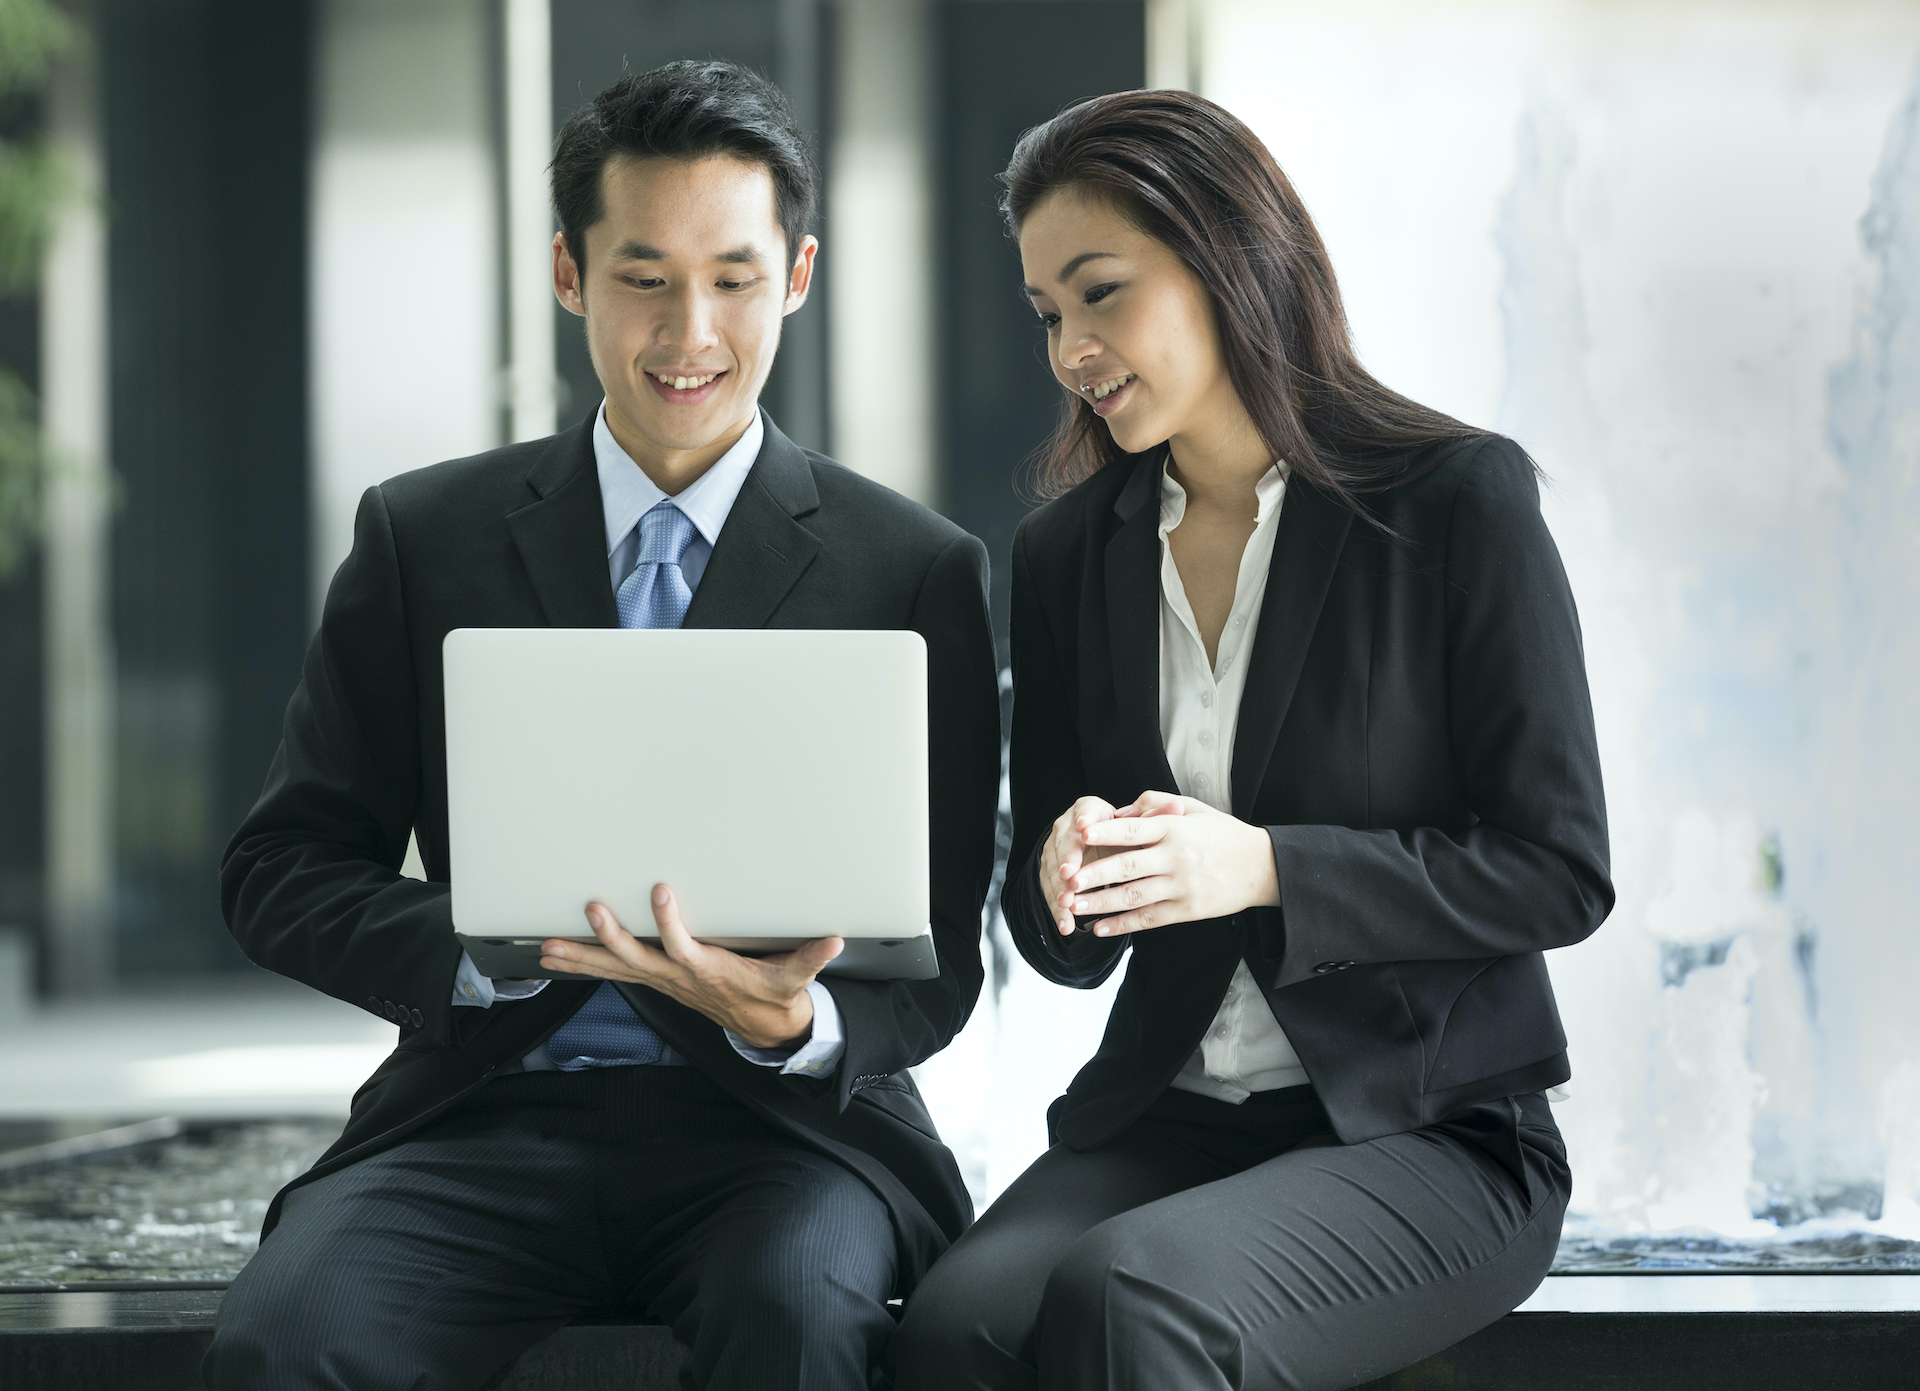 Asian man and woman in dark business suits looking at laptop screen together